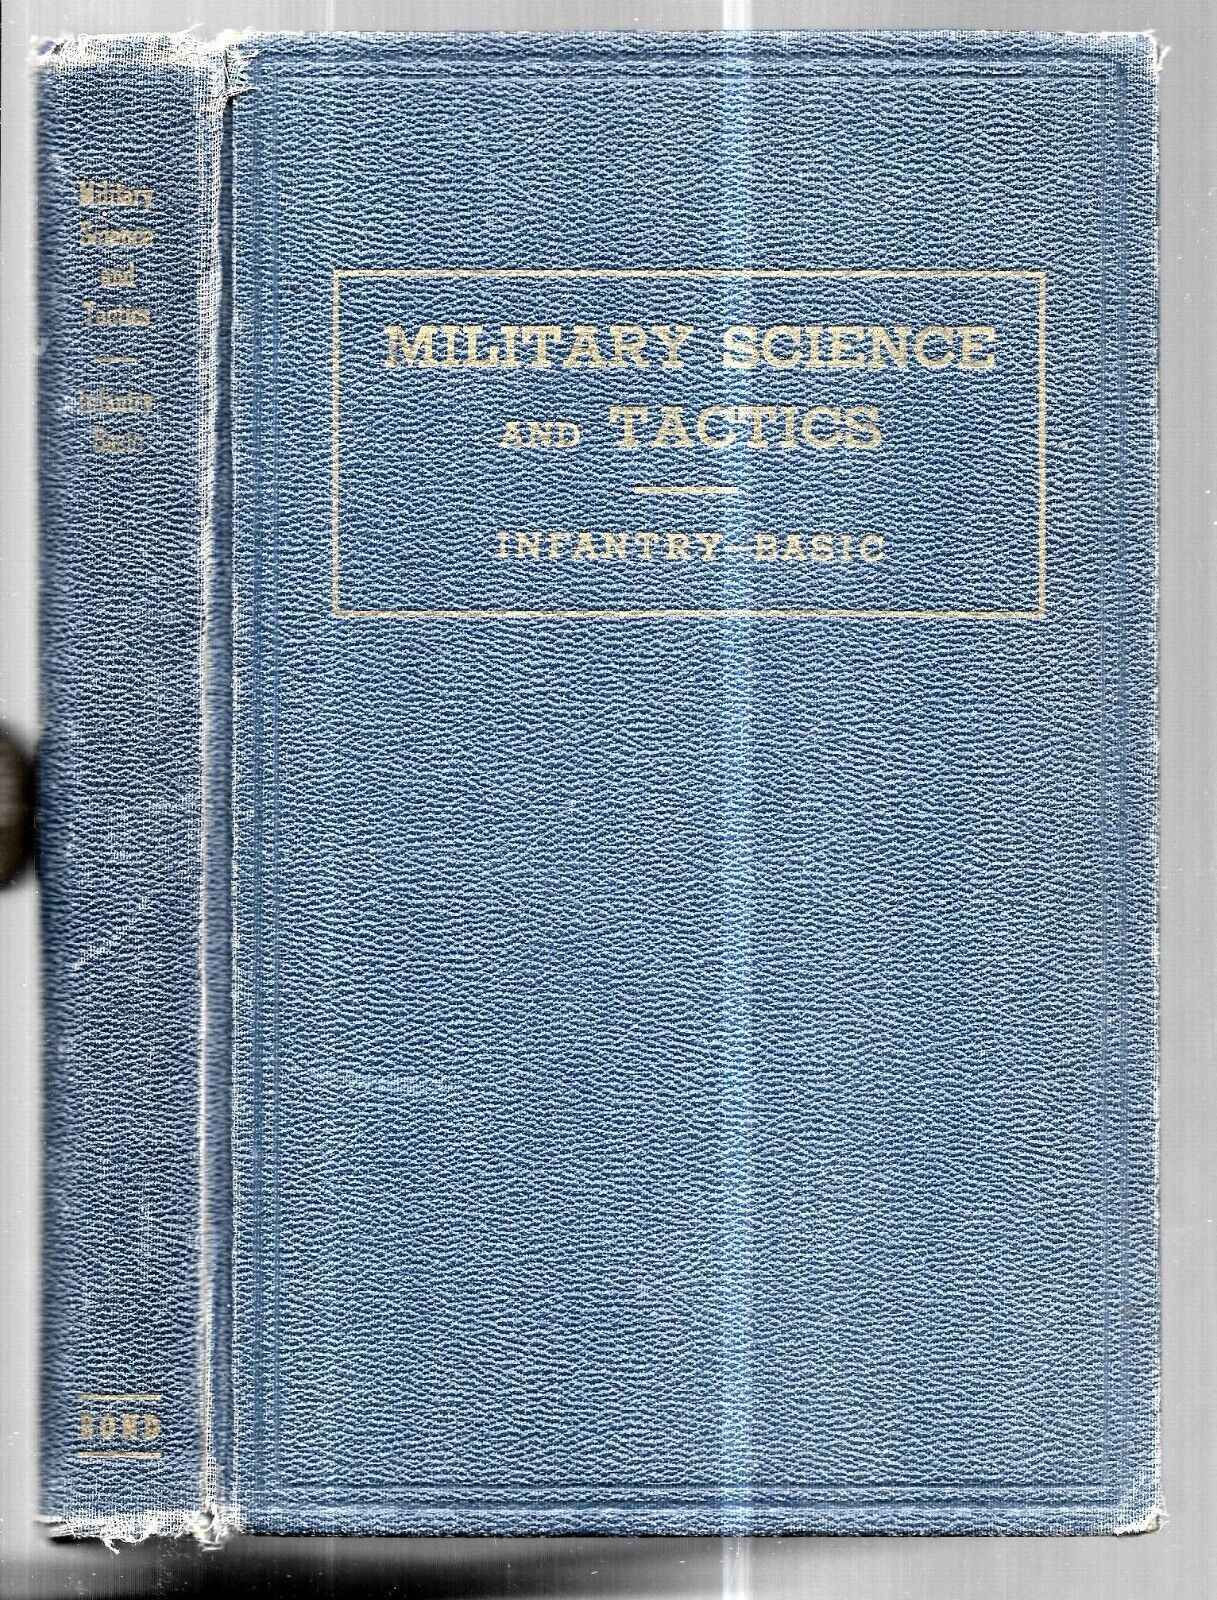 Military Science and Tactics Infantry Basic Course  (1940, Hardcover)